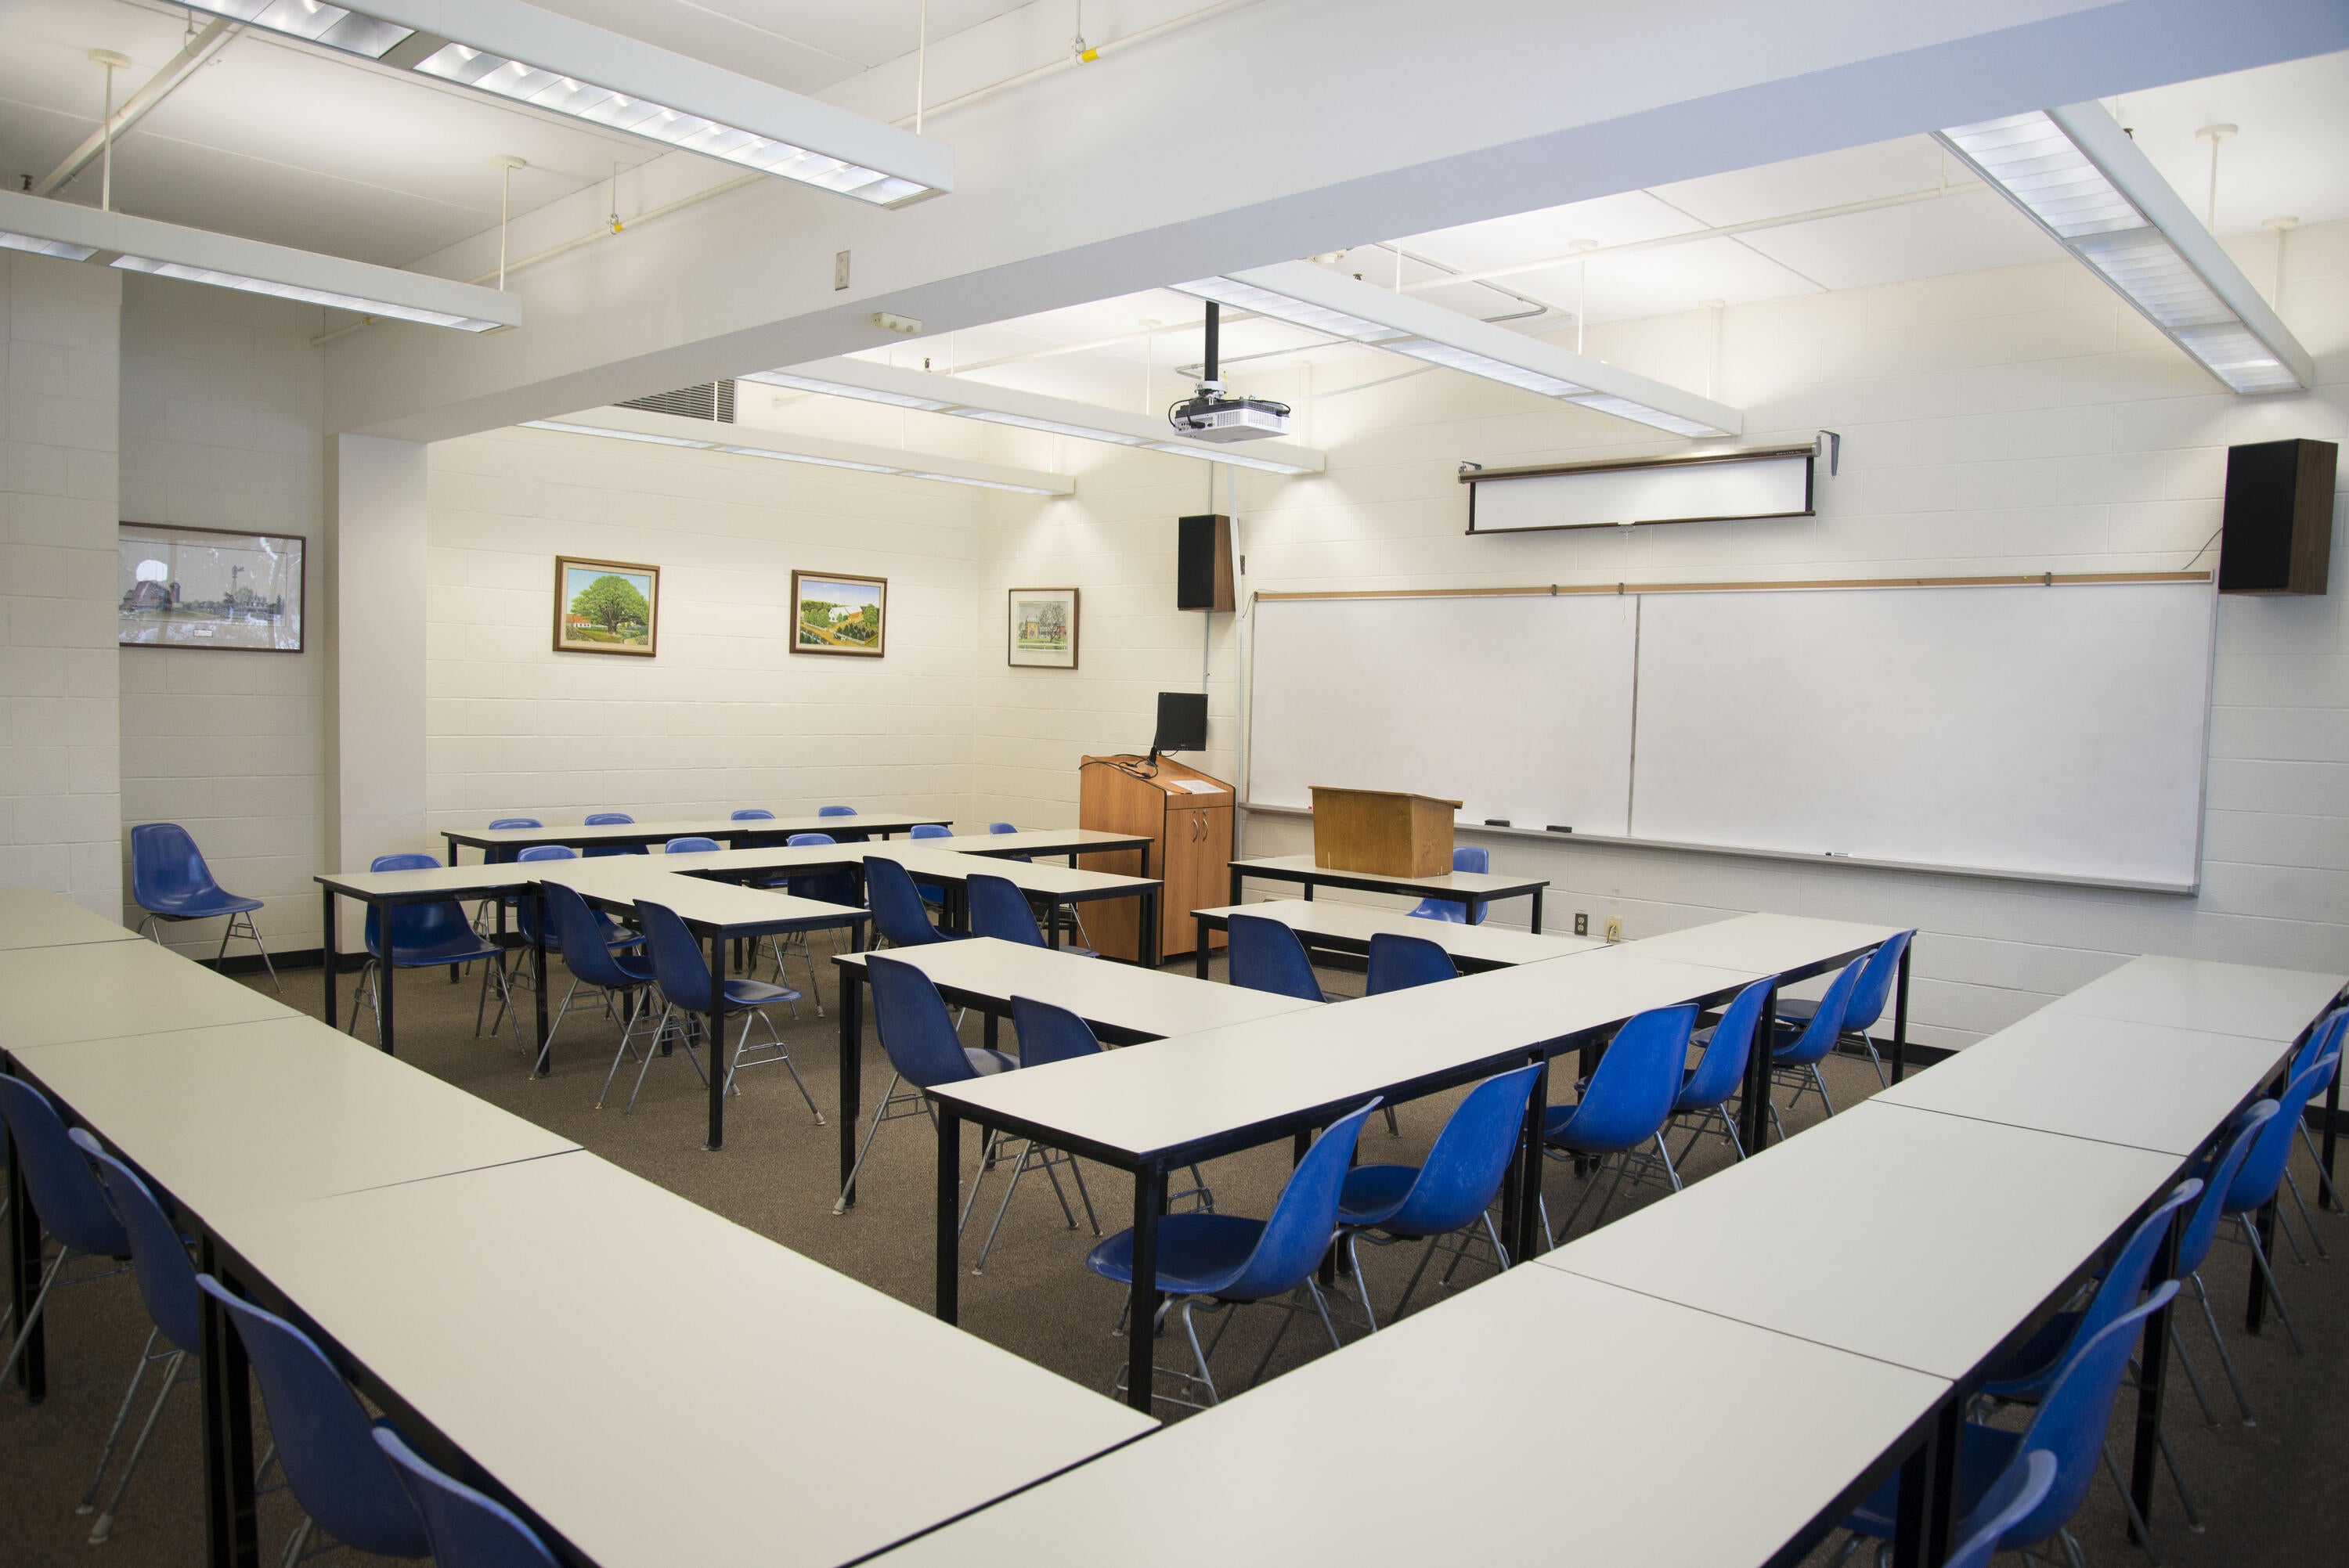 Classroom with long tables, chairs, a whiteboard, and a projector